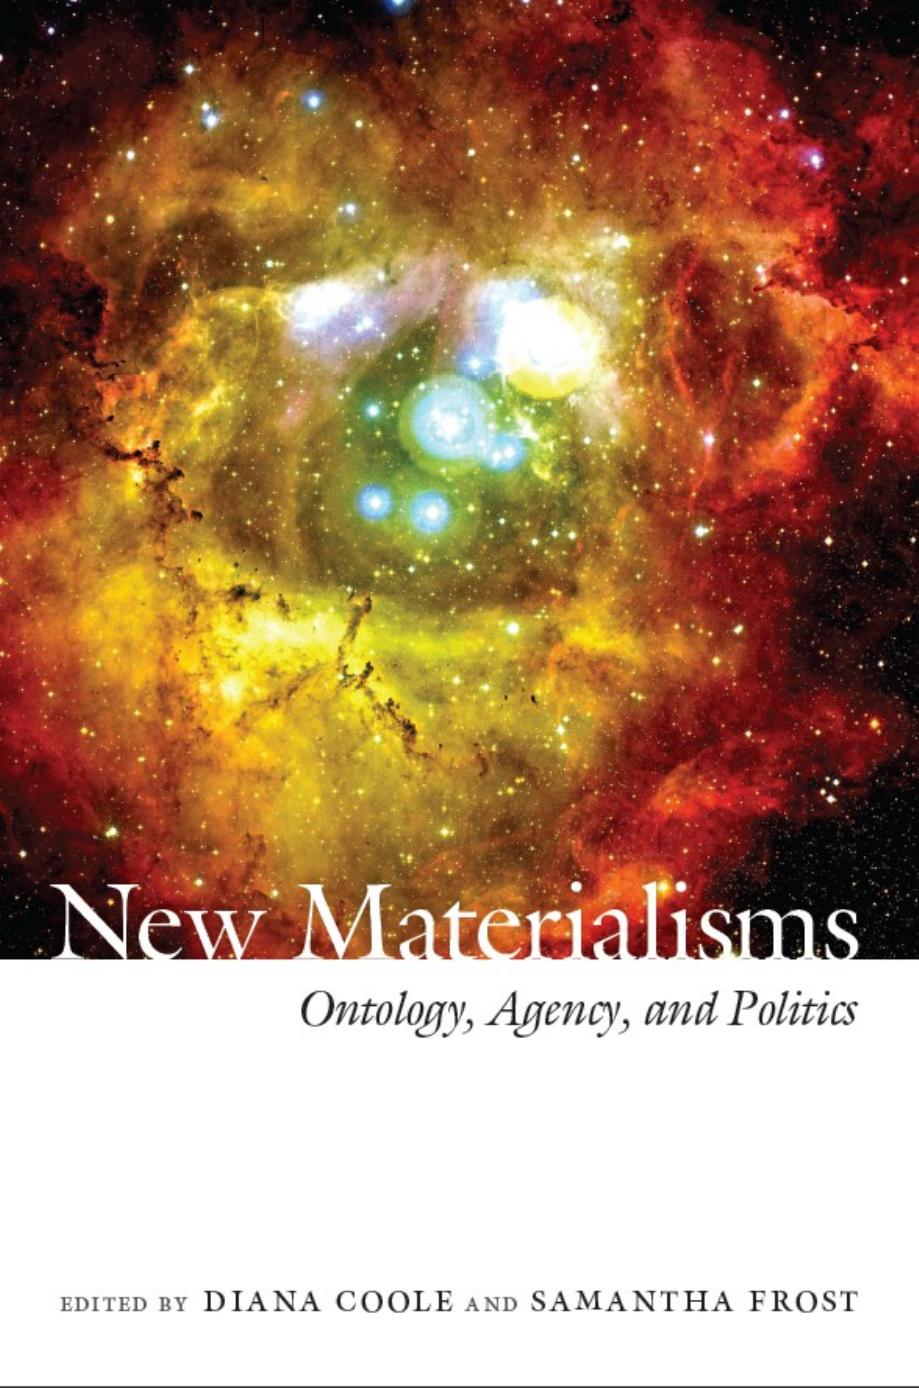 New Materialisms: Ontology, Agency, and Politics